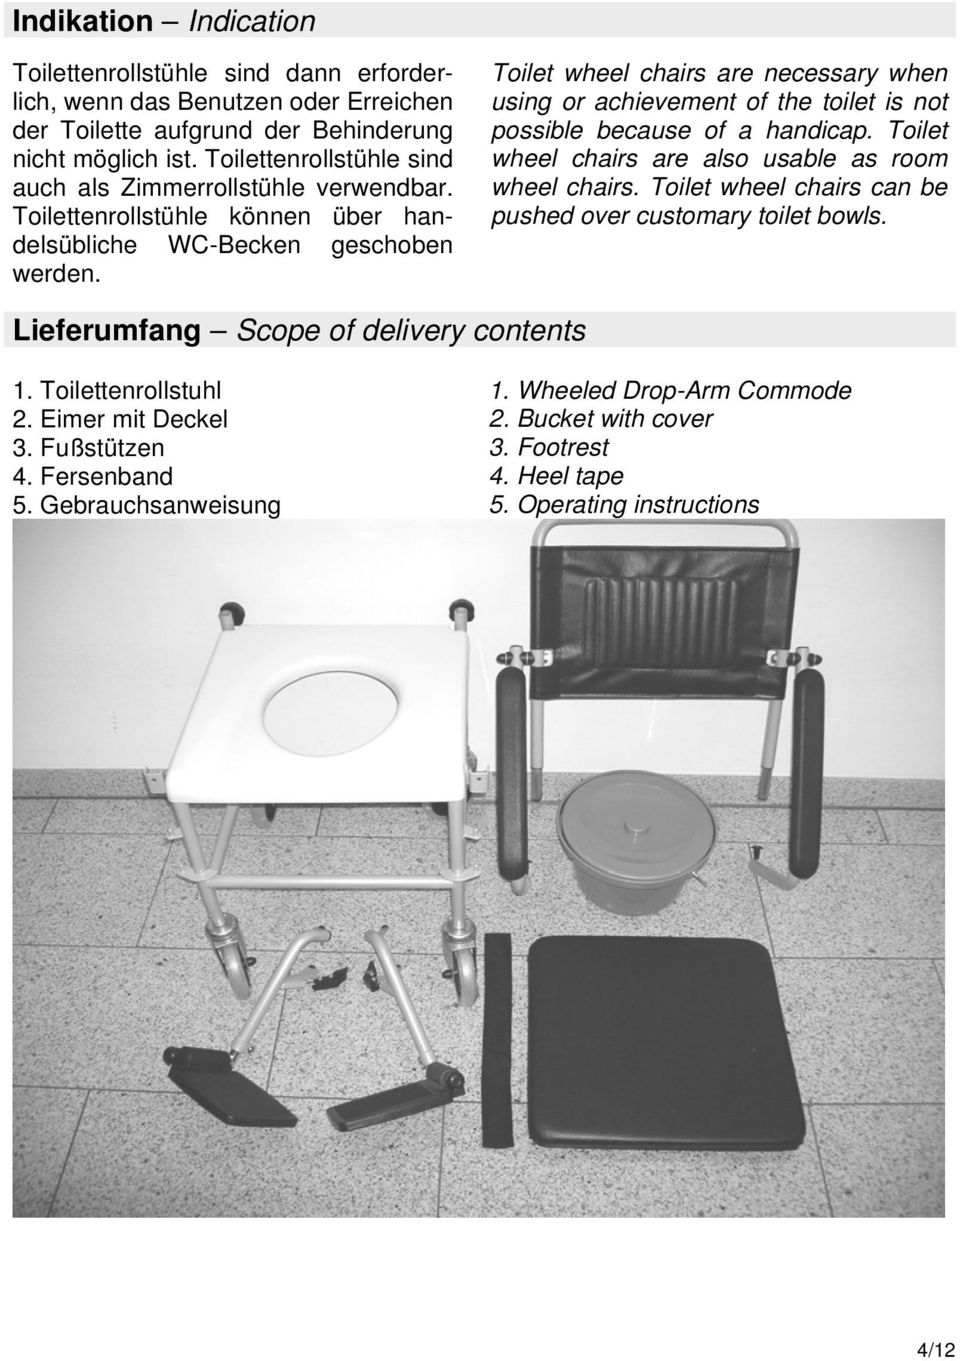 Toilet wheel chairs are necessary when using or achievement of the toilet is not possible because of a handicap. Toilet wheel chairs are also usable as room wheel chairs.